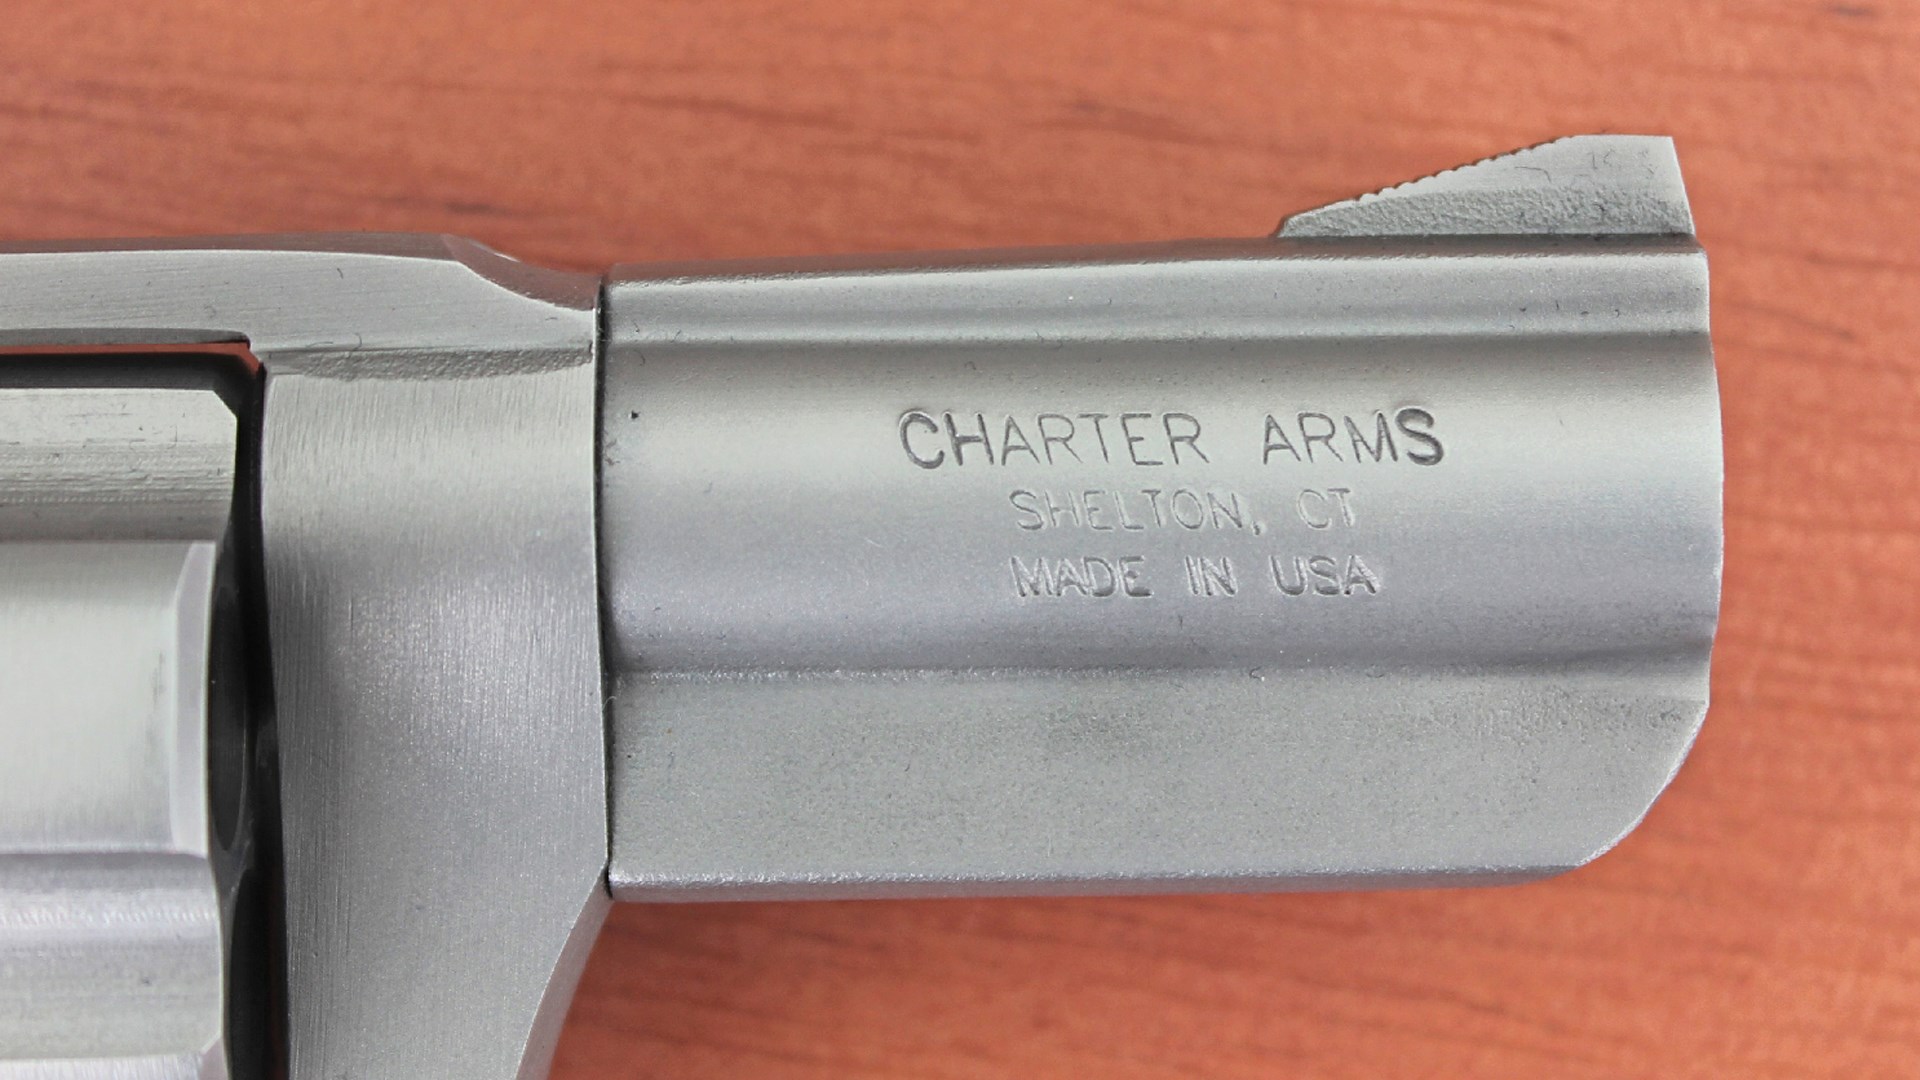 Charter Arms bulldog barrel revolver front sight stainless steel closeup muzzle wood table background